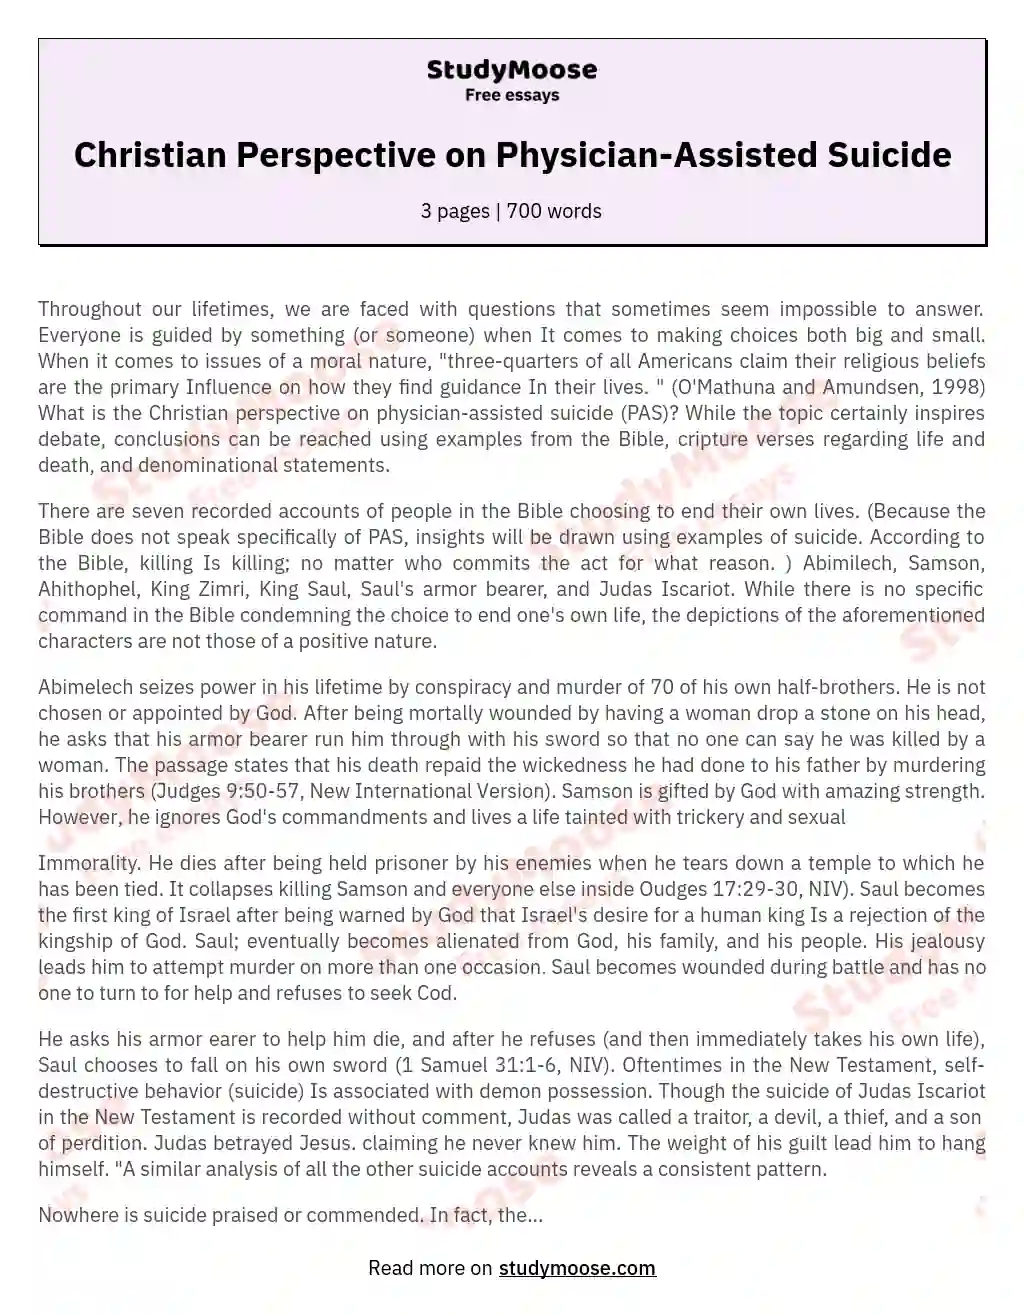 Christian Perspective on Physician-Assisted Suicide essay